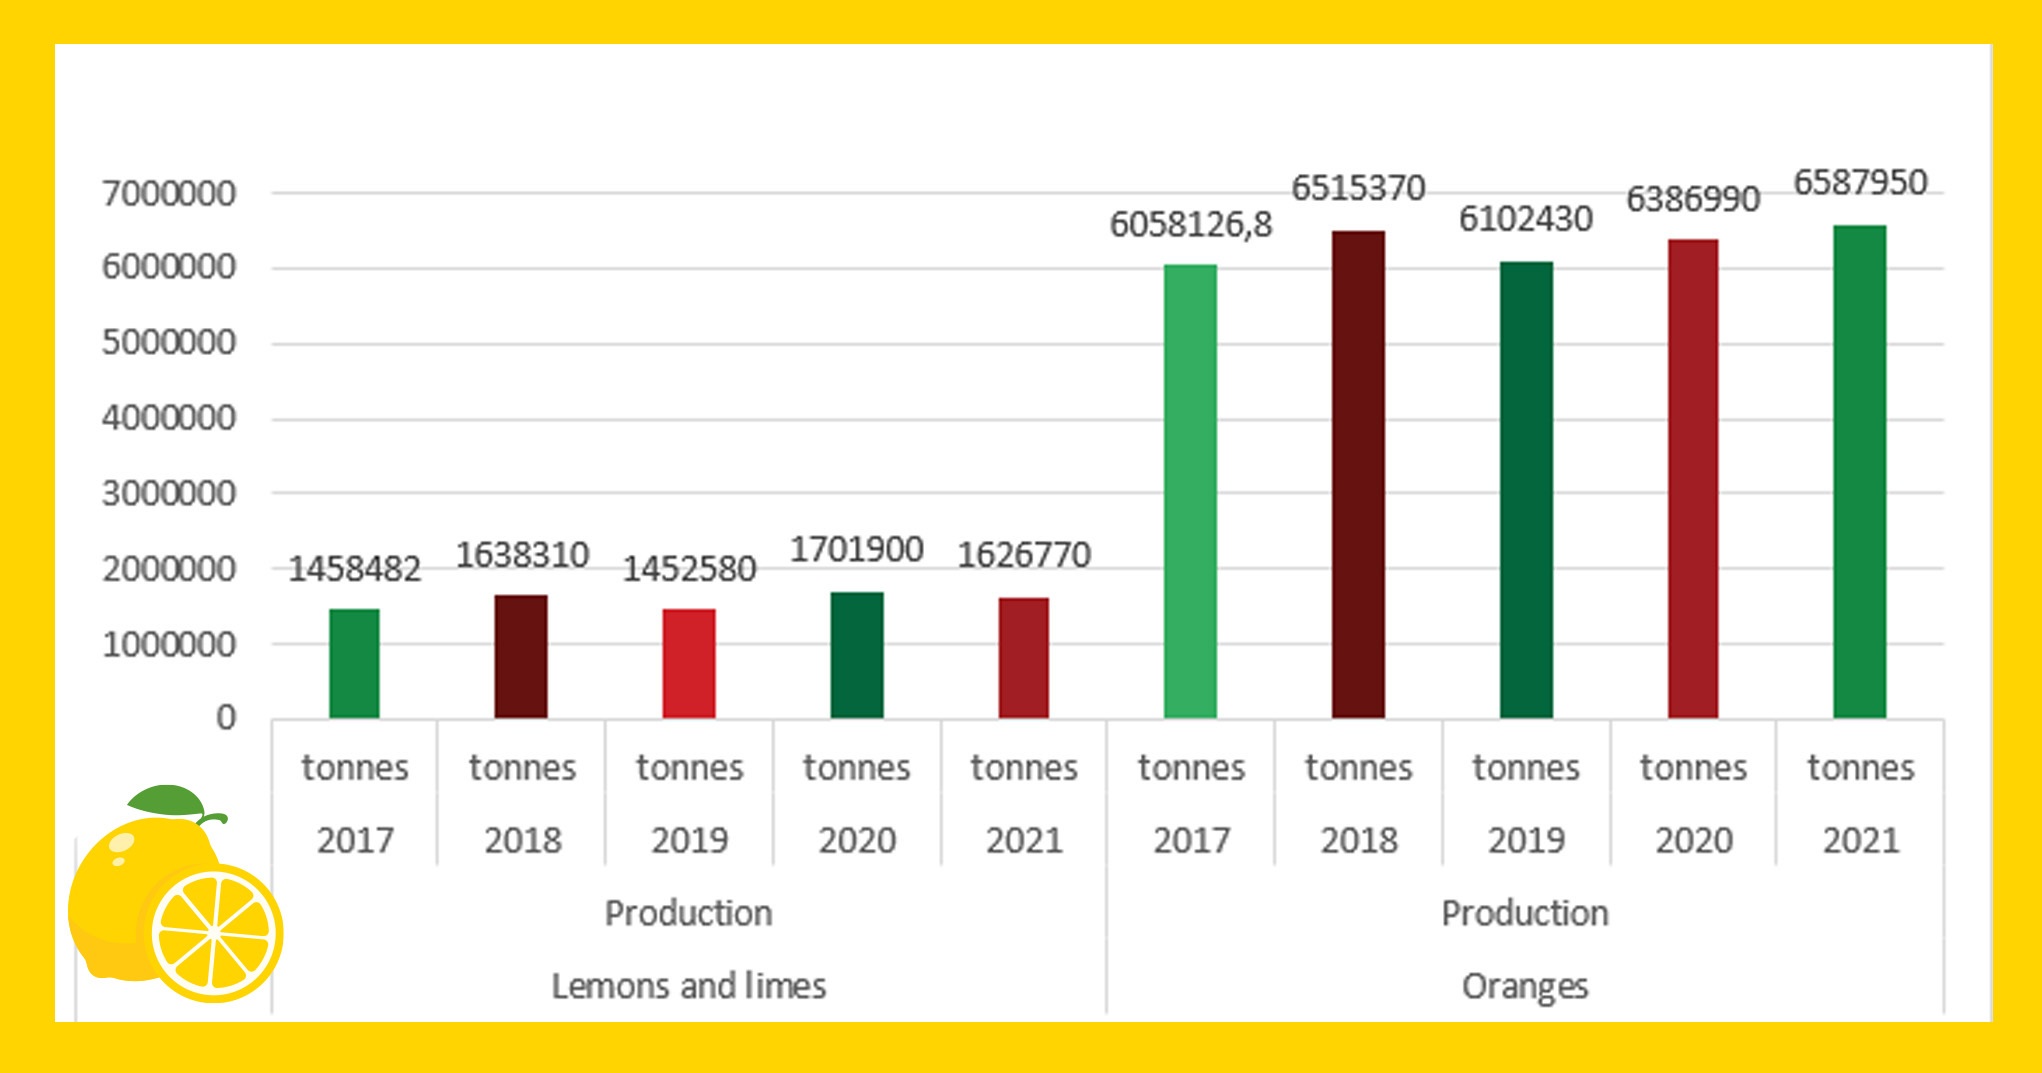 Bite-sized Info On Citrus Production in Europe